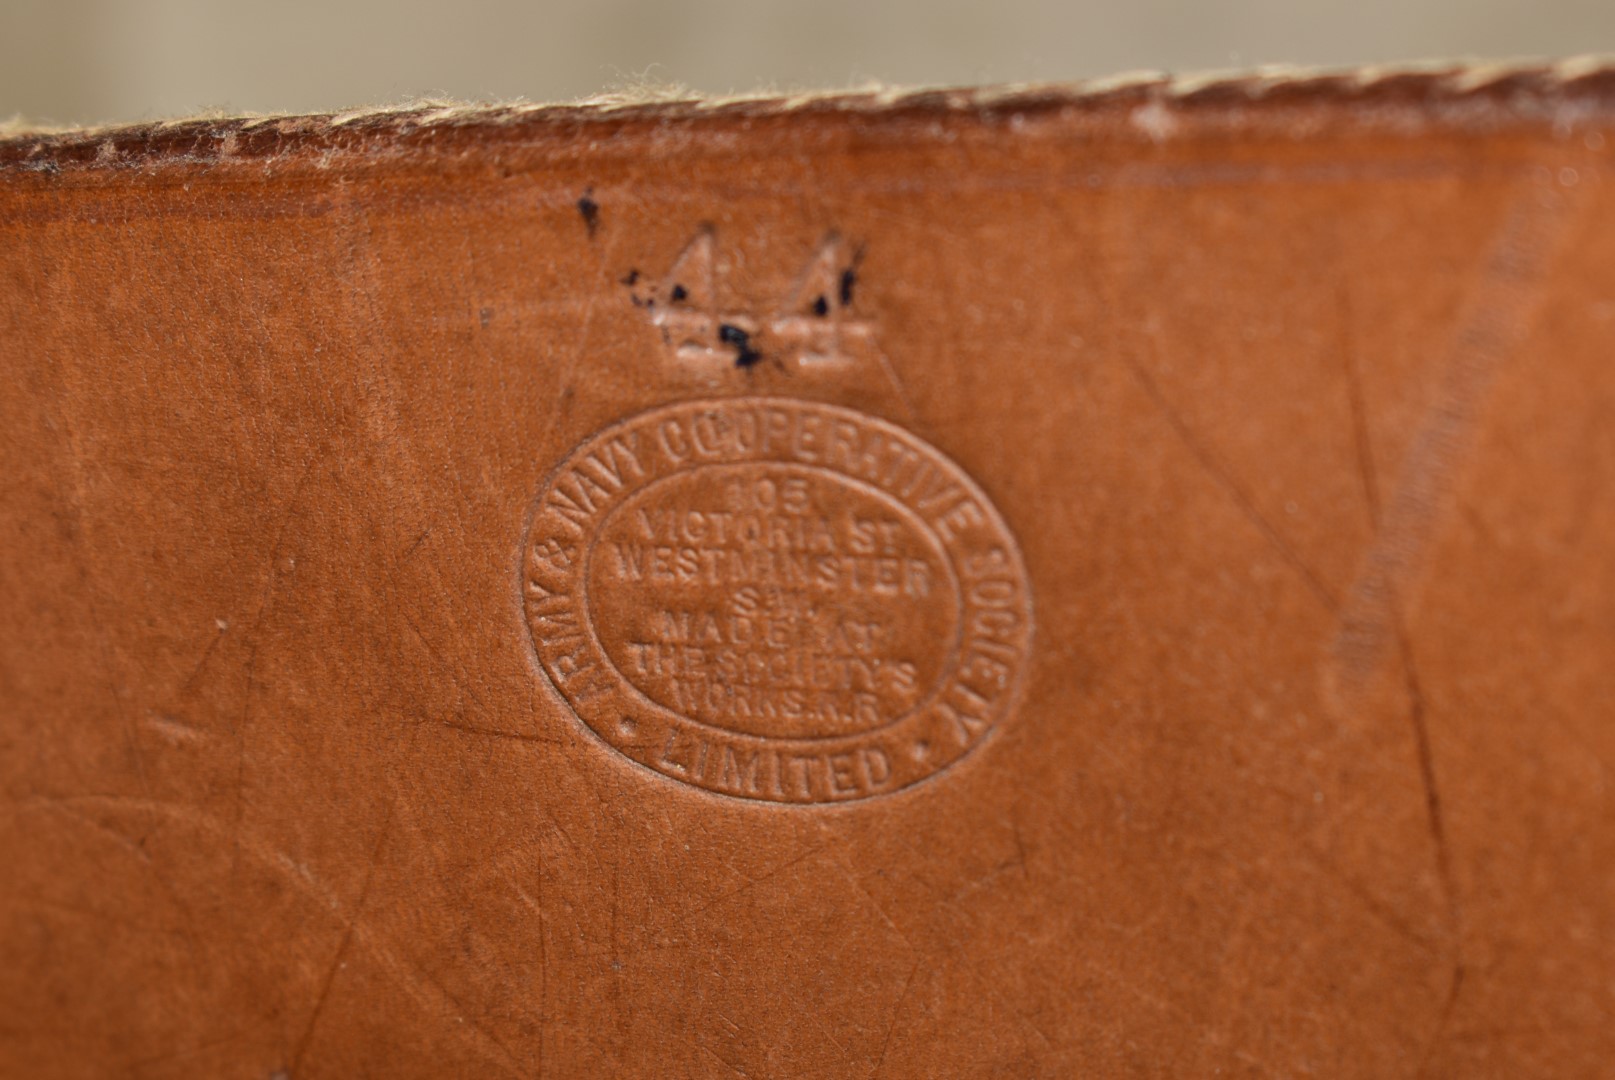 Calf leather case for Army & Navy Fishing Tackle Compendium, stamped with A&NCSL oval logo, all - Image 7 of 7